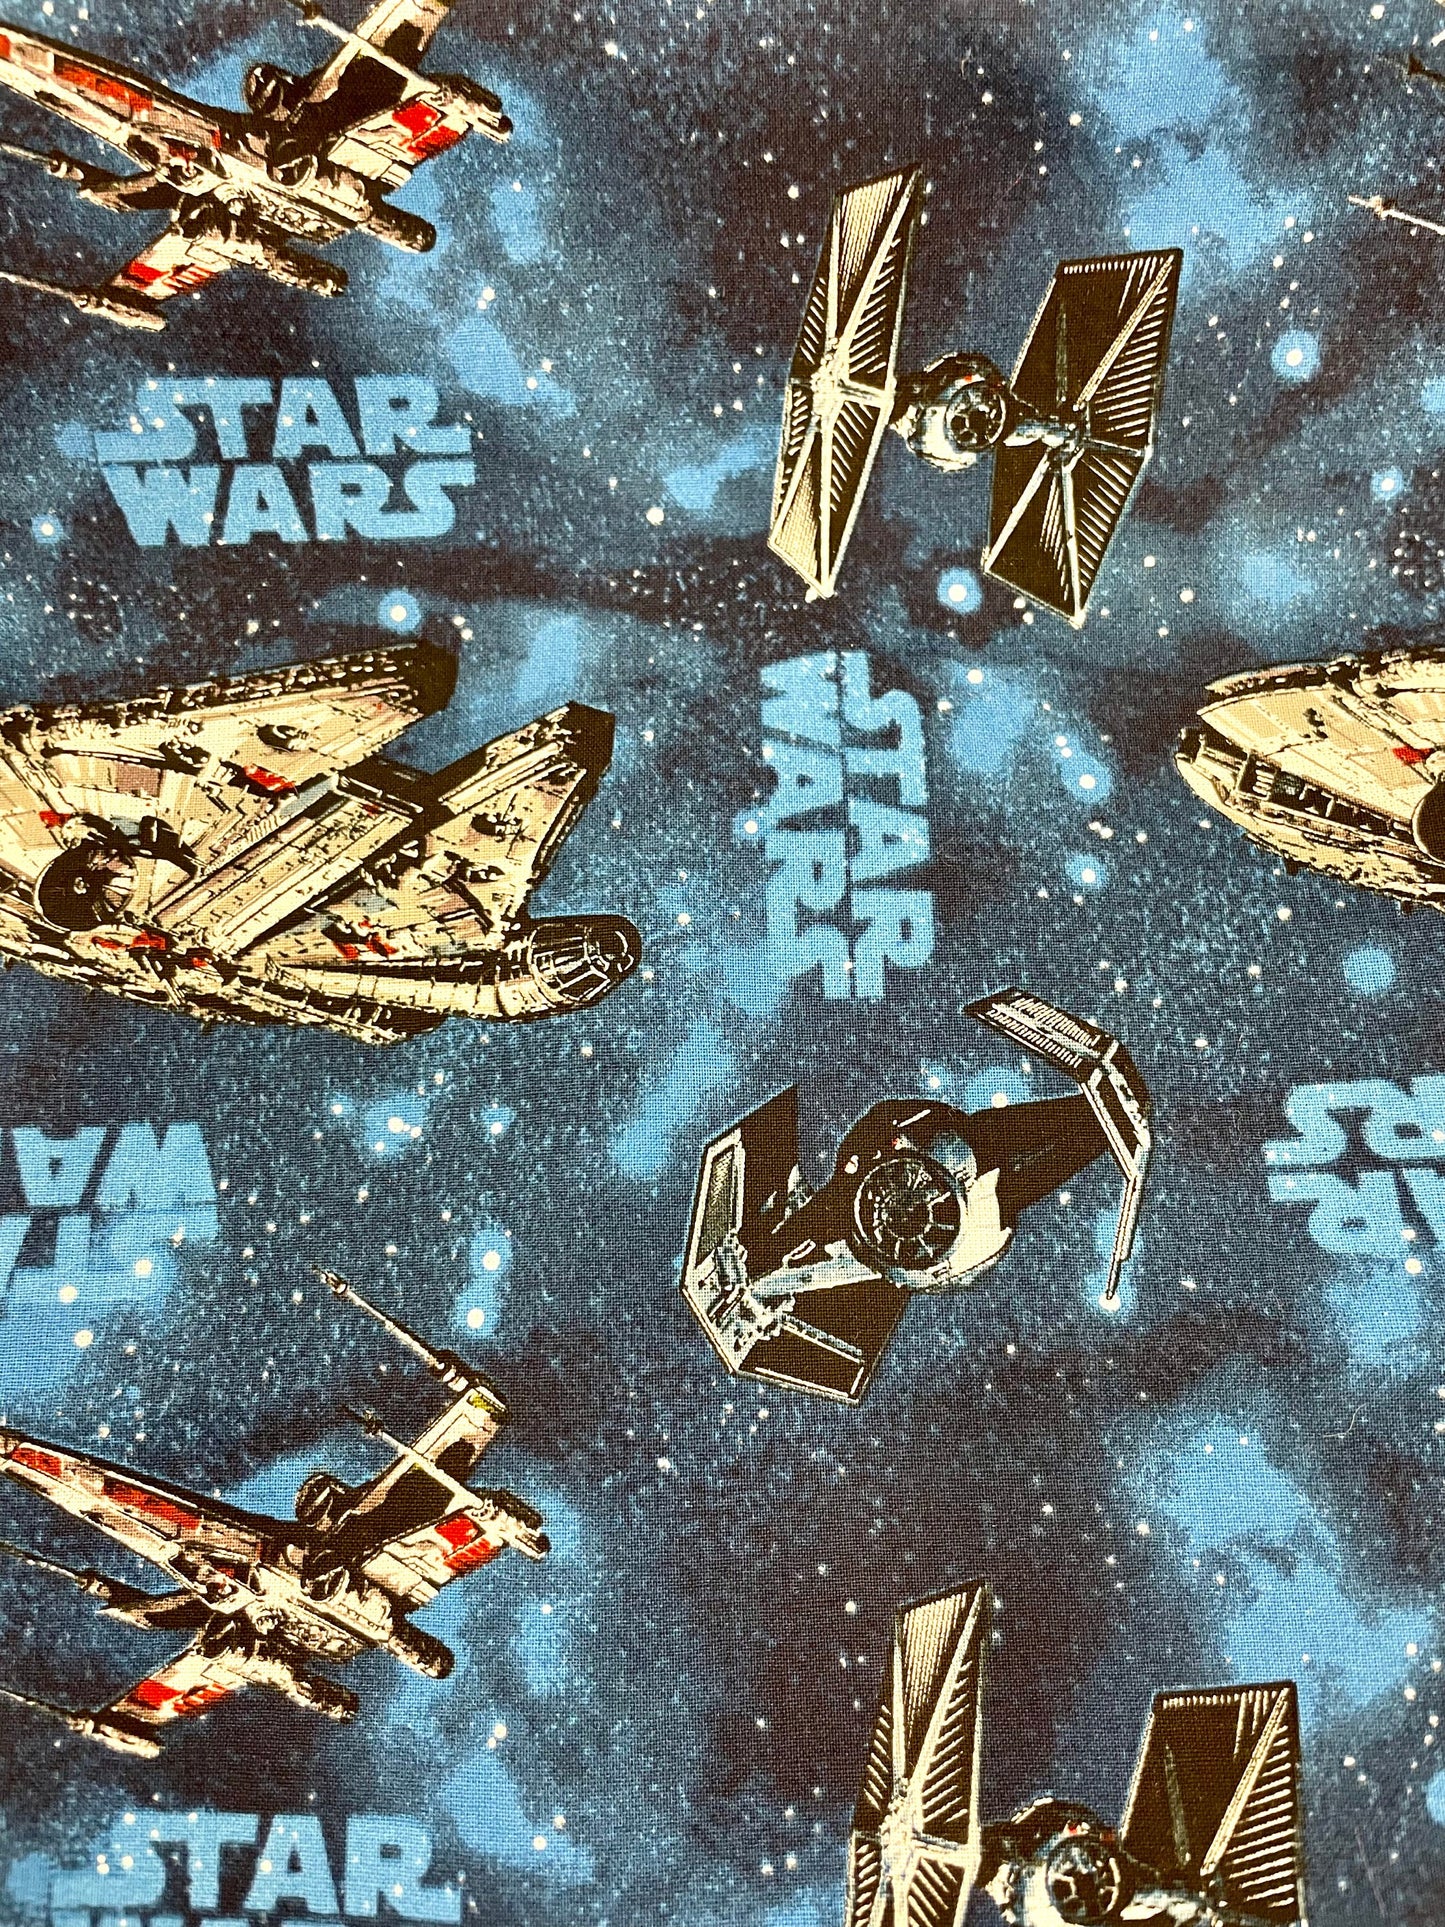 Ultimate Star Wars fighter jets and millennium falcon blanket!